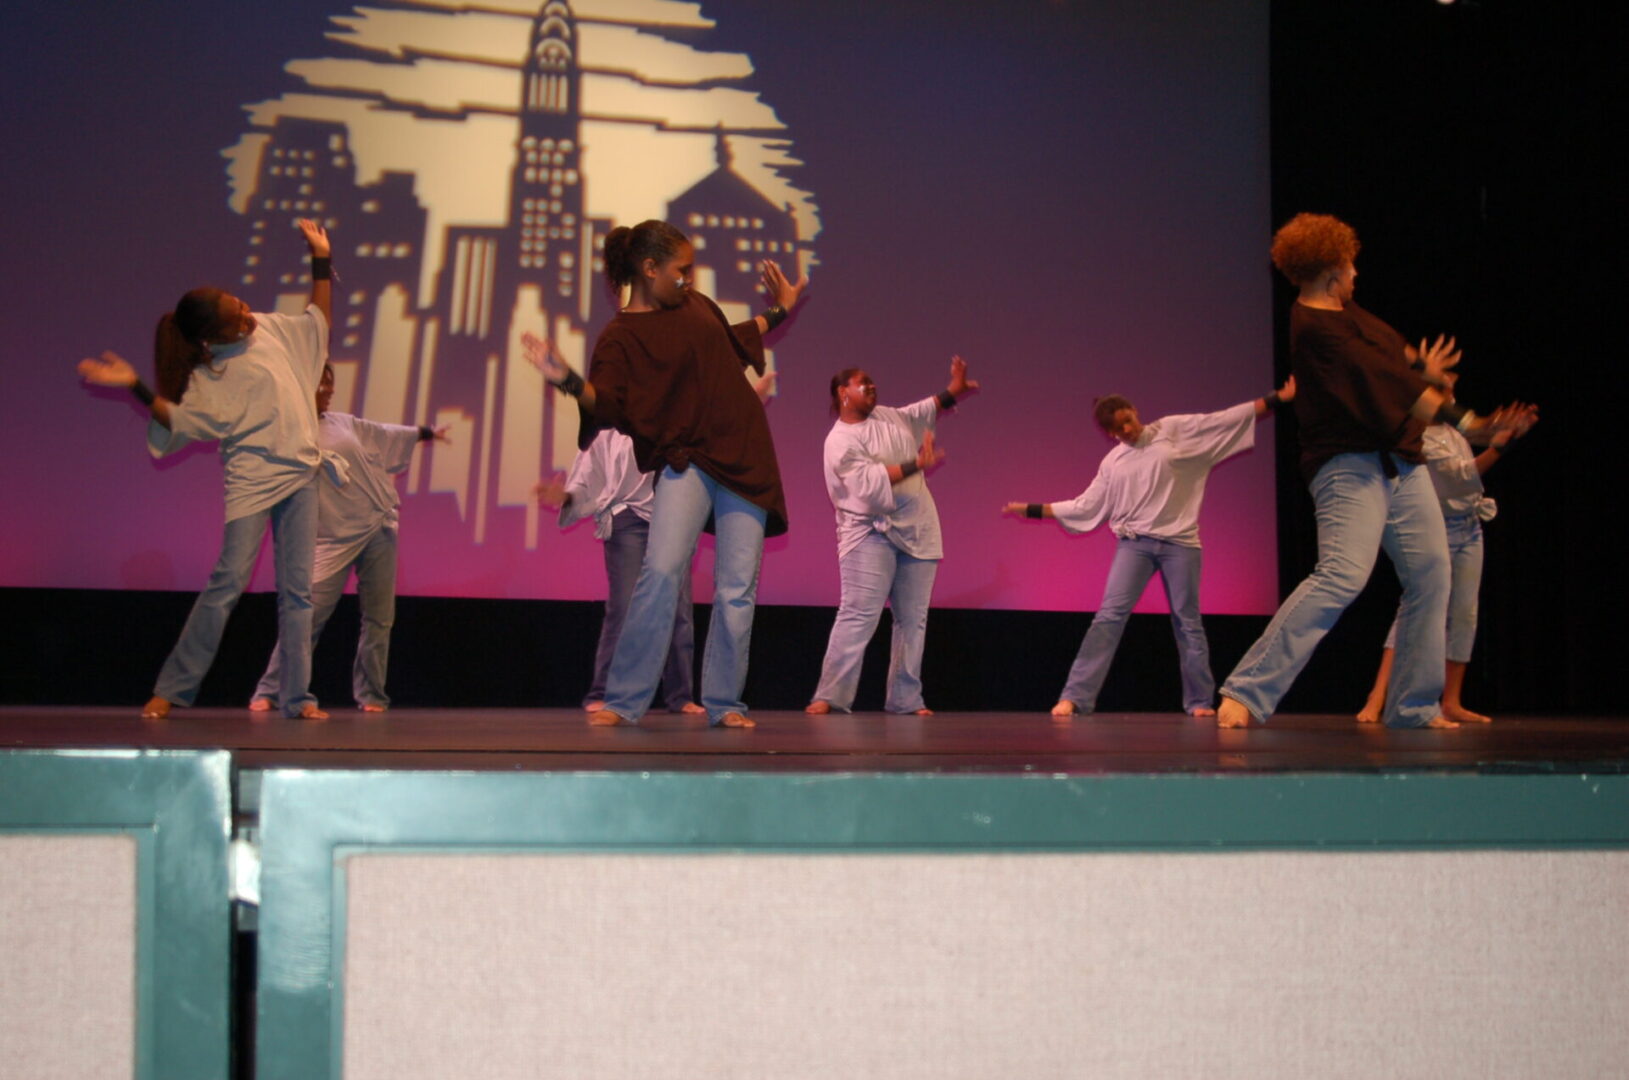 A group of people on stage performing a dance.